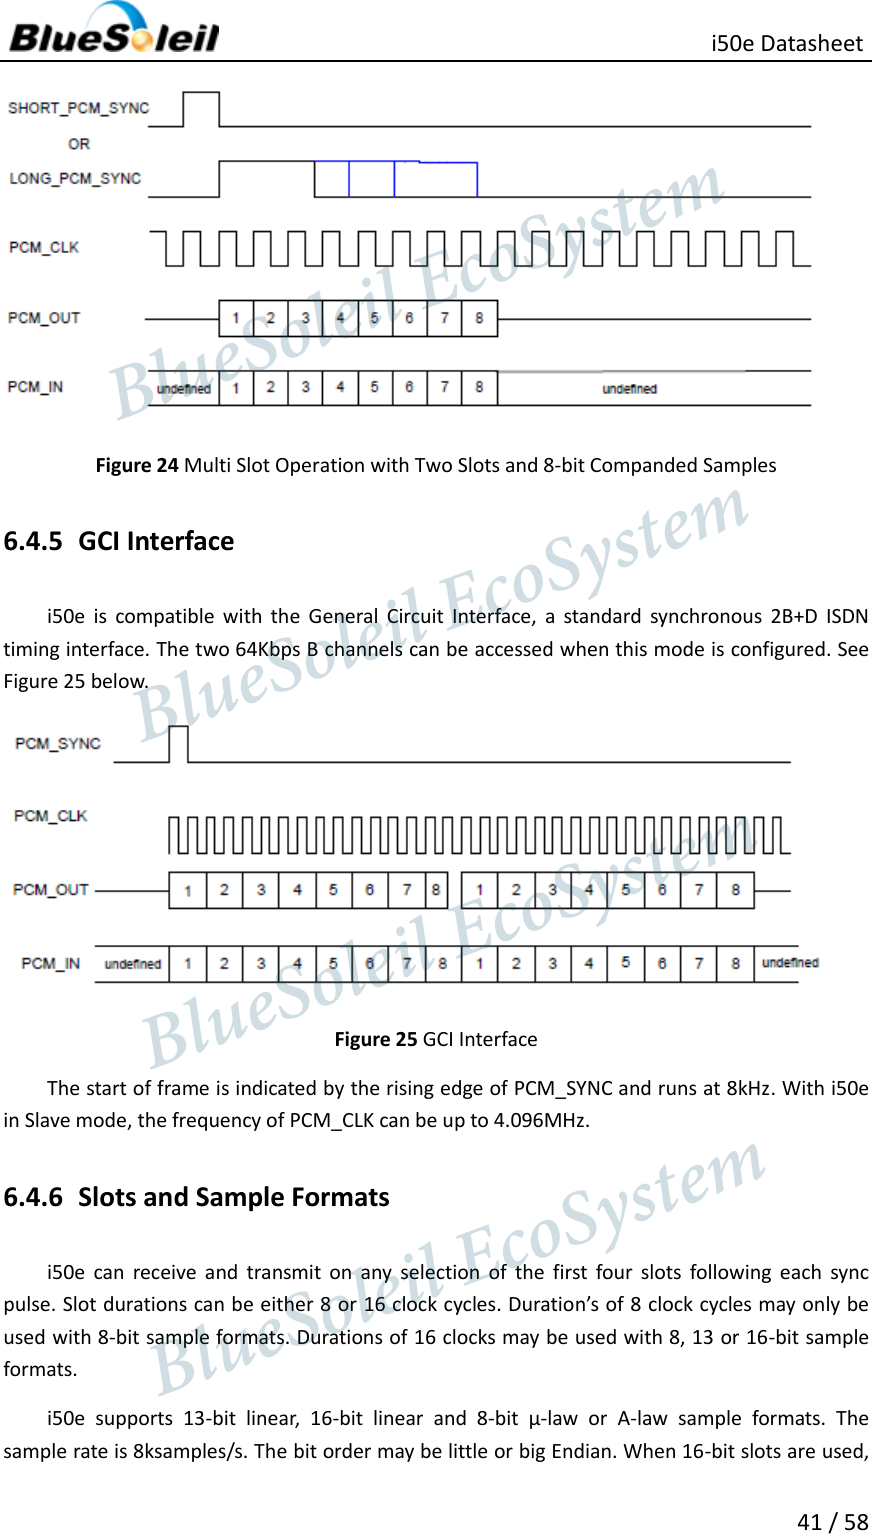                                                   i50e Datasheet 41 / 58  Figure 24 Multi Slot Operation with Two Slots and 8-bit Companded Samples 6.4.5 GCI Interface i50e  is  compatible  with  the  General  Circuit  Interface,  a  standard  synchronous  2B+D  ISDN timing interface. The two 64Kbps B channels can be accessed when this mode is configured. See Figure 25 below.  Figure 25 GCI Interface The start of frame is indicated by the rising edge of PCM_SYNC and runs at 8kHz. With i50e in Slave mode, the frequency of PCM_CLK can be up to 4.096MHz. 6.4.6 Slots and Sample Formats i50e  can  receive  and  transmit  on  any  selection  of  the  first  four  slots  following  each  sync pulse. Slot durations can be either 8 or 16 clock cycles. Duration’s of 8 clock cycles may only be used with 8-bit sample formats. Durations of 16 clocks may be used with 8, 13 or 16-bit sample formats. i50e  supports  13-bit  linear,  16-bit  linear  and  8-bit  µ-law  or  A-law  sample  formats.  The sample rate is 8ksamples/s. The bit order may be little or big Endian. When 16-bit slots are used,                  BlueSoleil EcoSystem            BlueSoleil EcoSystem      BlueSoleil EcoSystemBlueSoleil EcoSystem